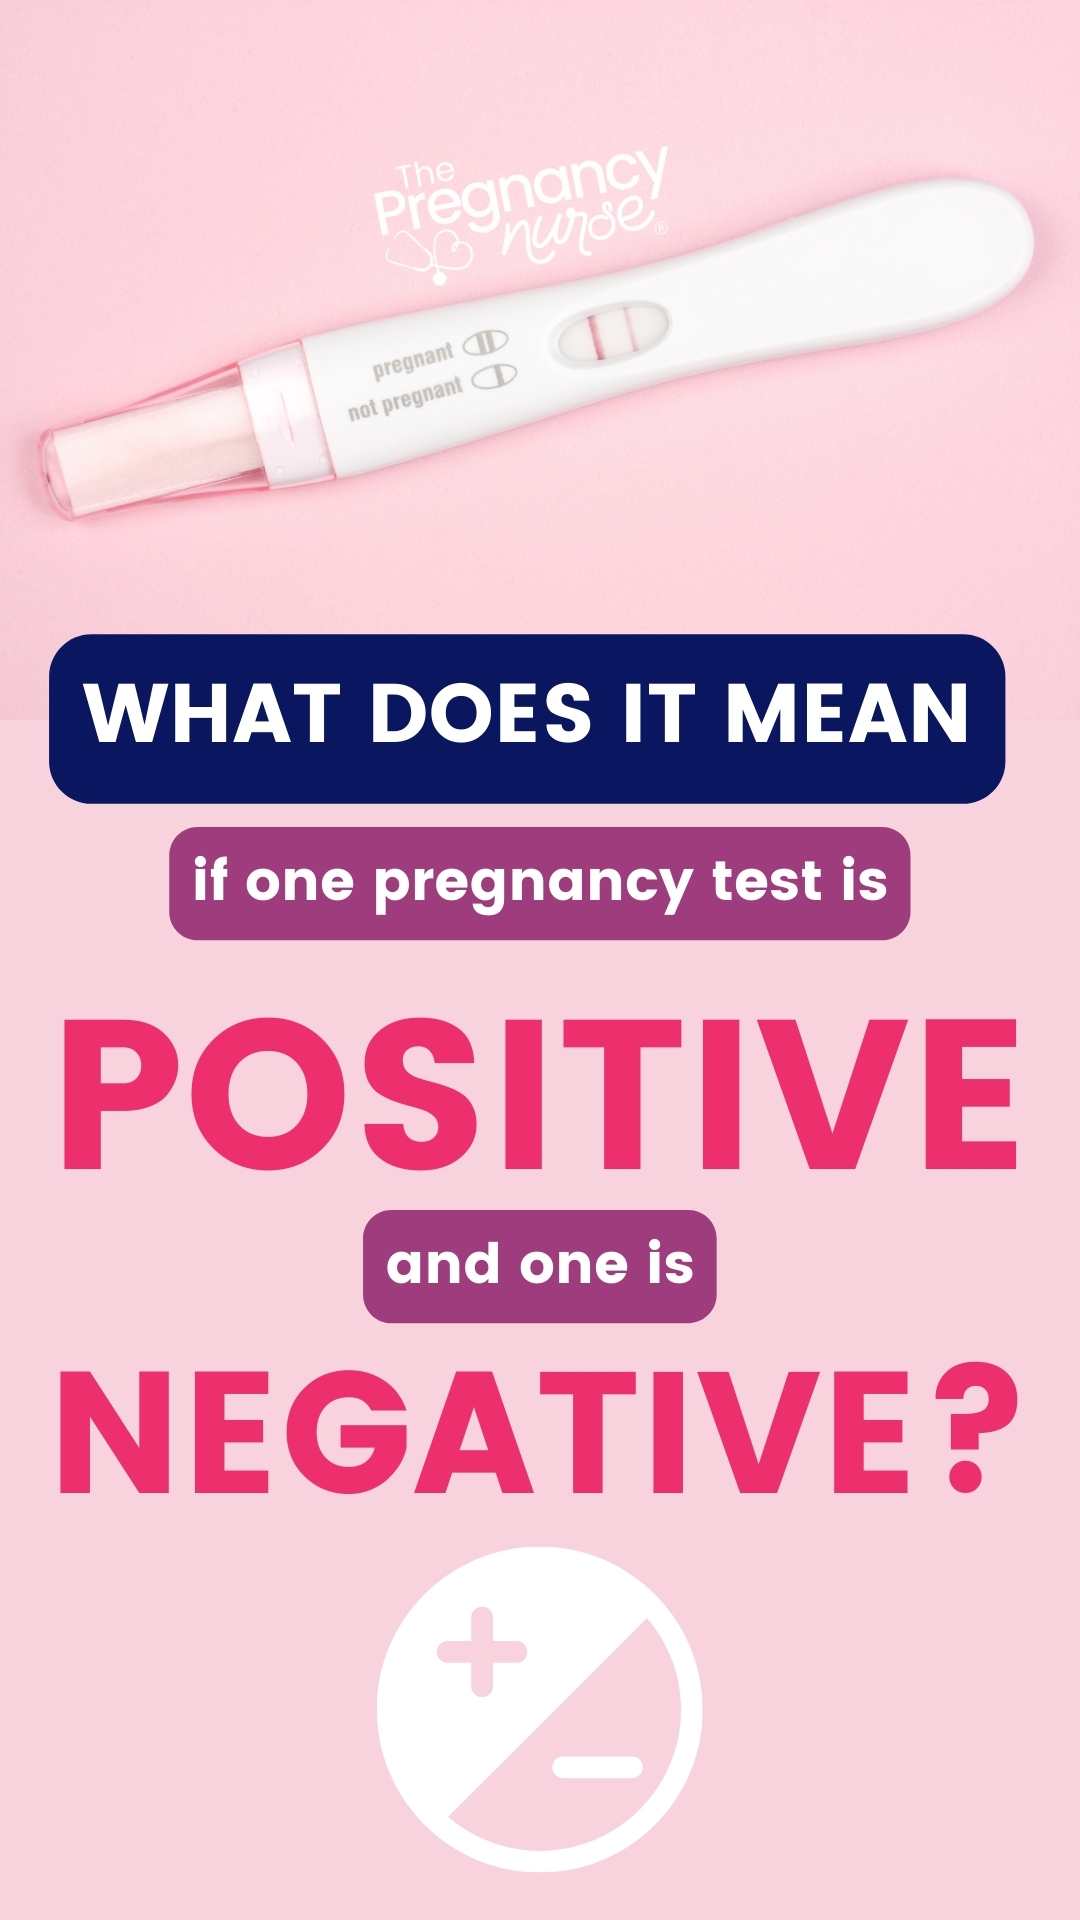 A false positive pregnancy test result occurs when the test shows a positive result for pregnancy, but the person is not actually pregnant. This can be caused by a variety of factors, including a chemical pregnancy (when a fertilized egg implants but does not develop), medications that contain hCG (the hormone detected by pregnancy tests), or a faulty test. It can be a confusing and emotional experience,